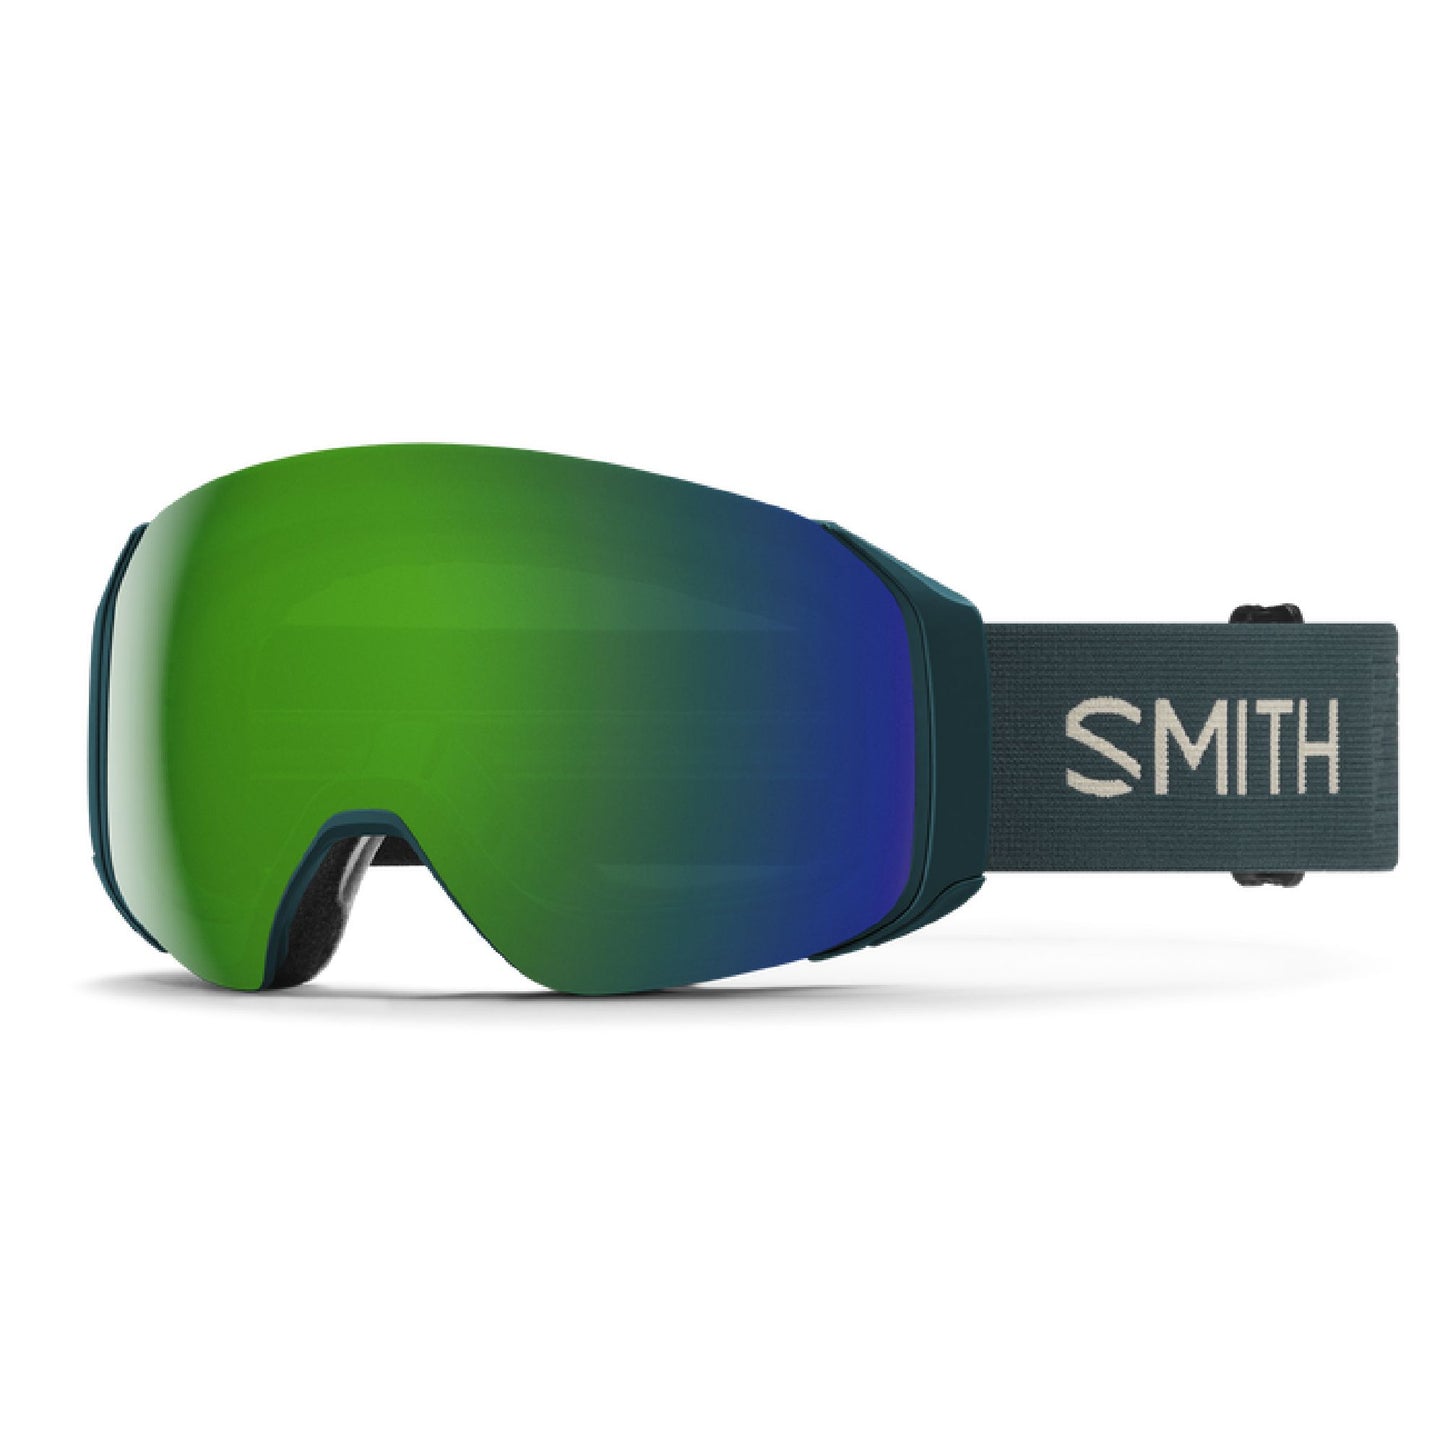 Smith 4D MAG S Snow Goggle Pacific Flow / ChromaPop Everyday Green Mirror Snow Goggles